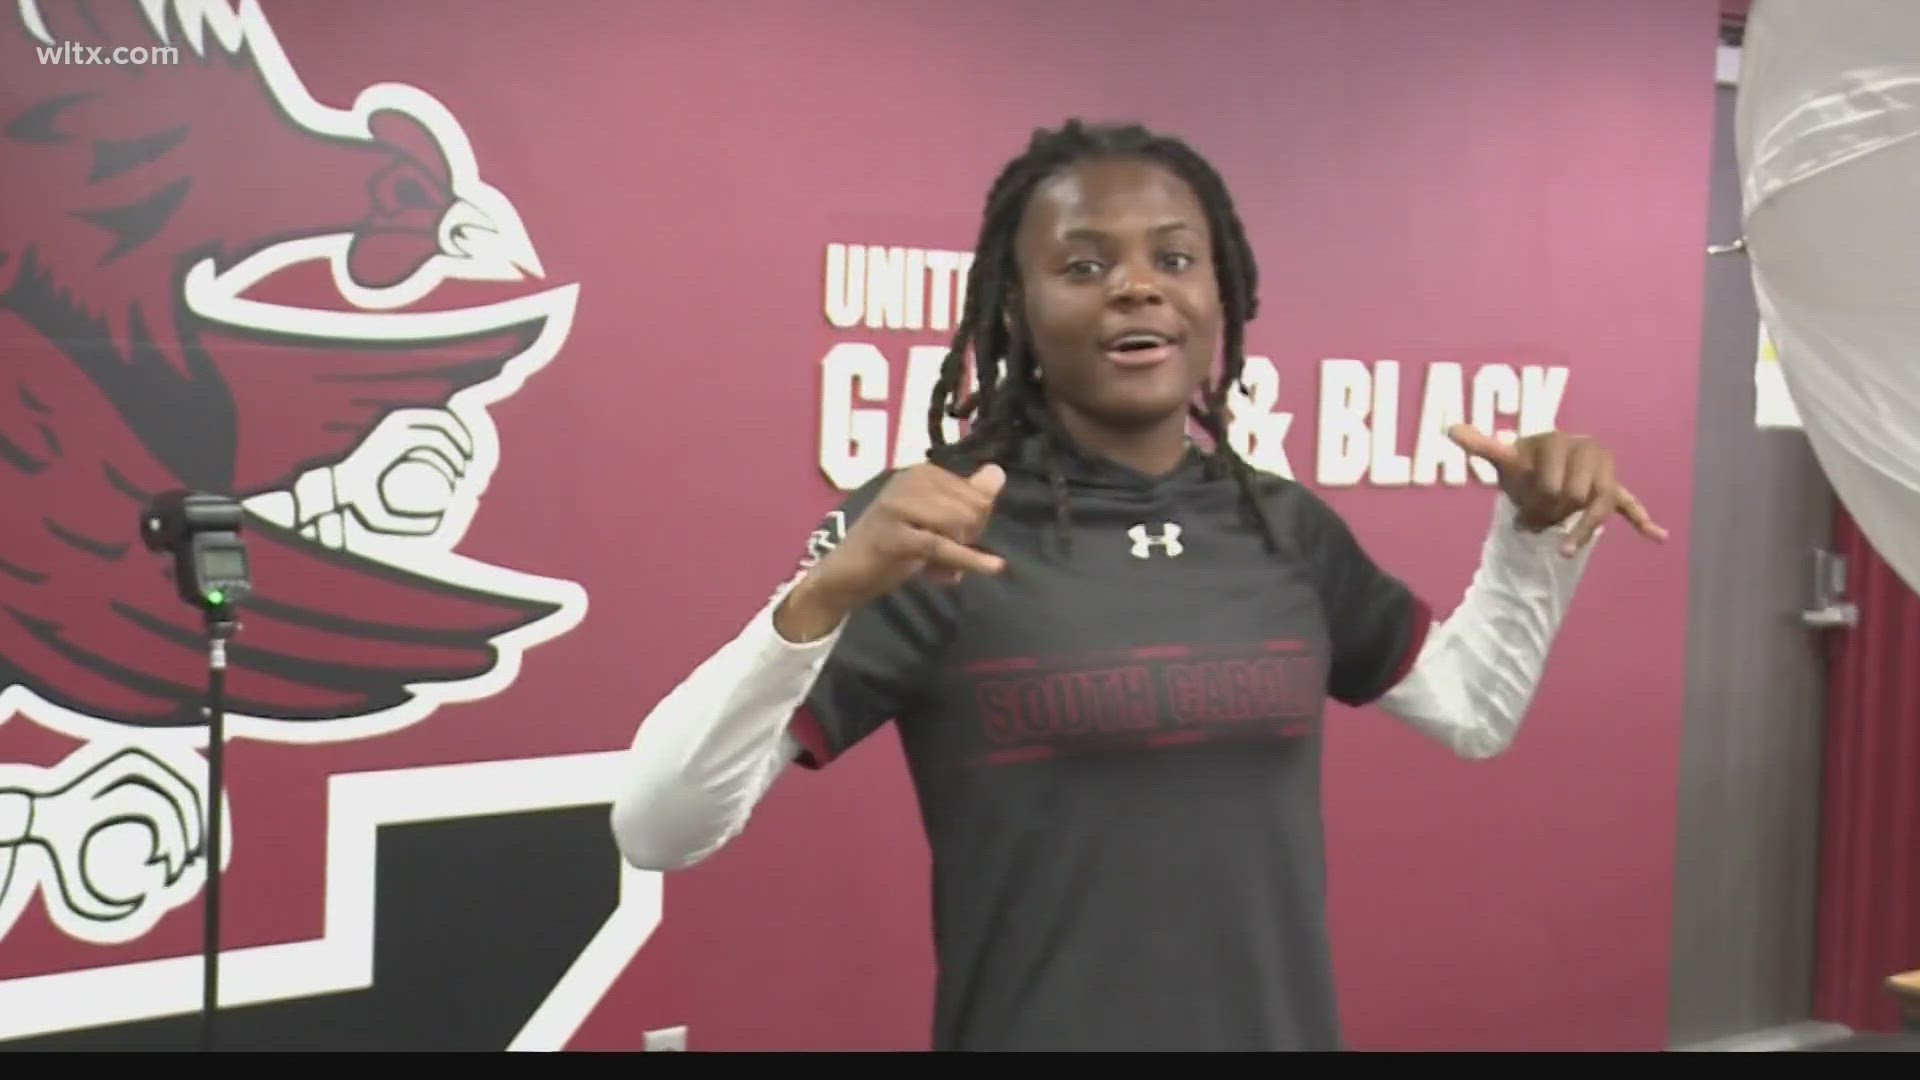 One of the most exciting players to watch during her high school days at W.J. Keenan, MiLaysia Fulwiley is now turning heads at South Carolina.